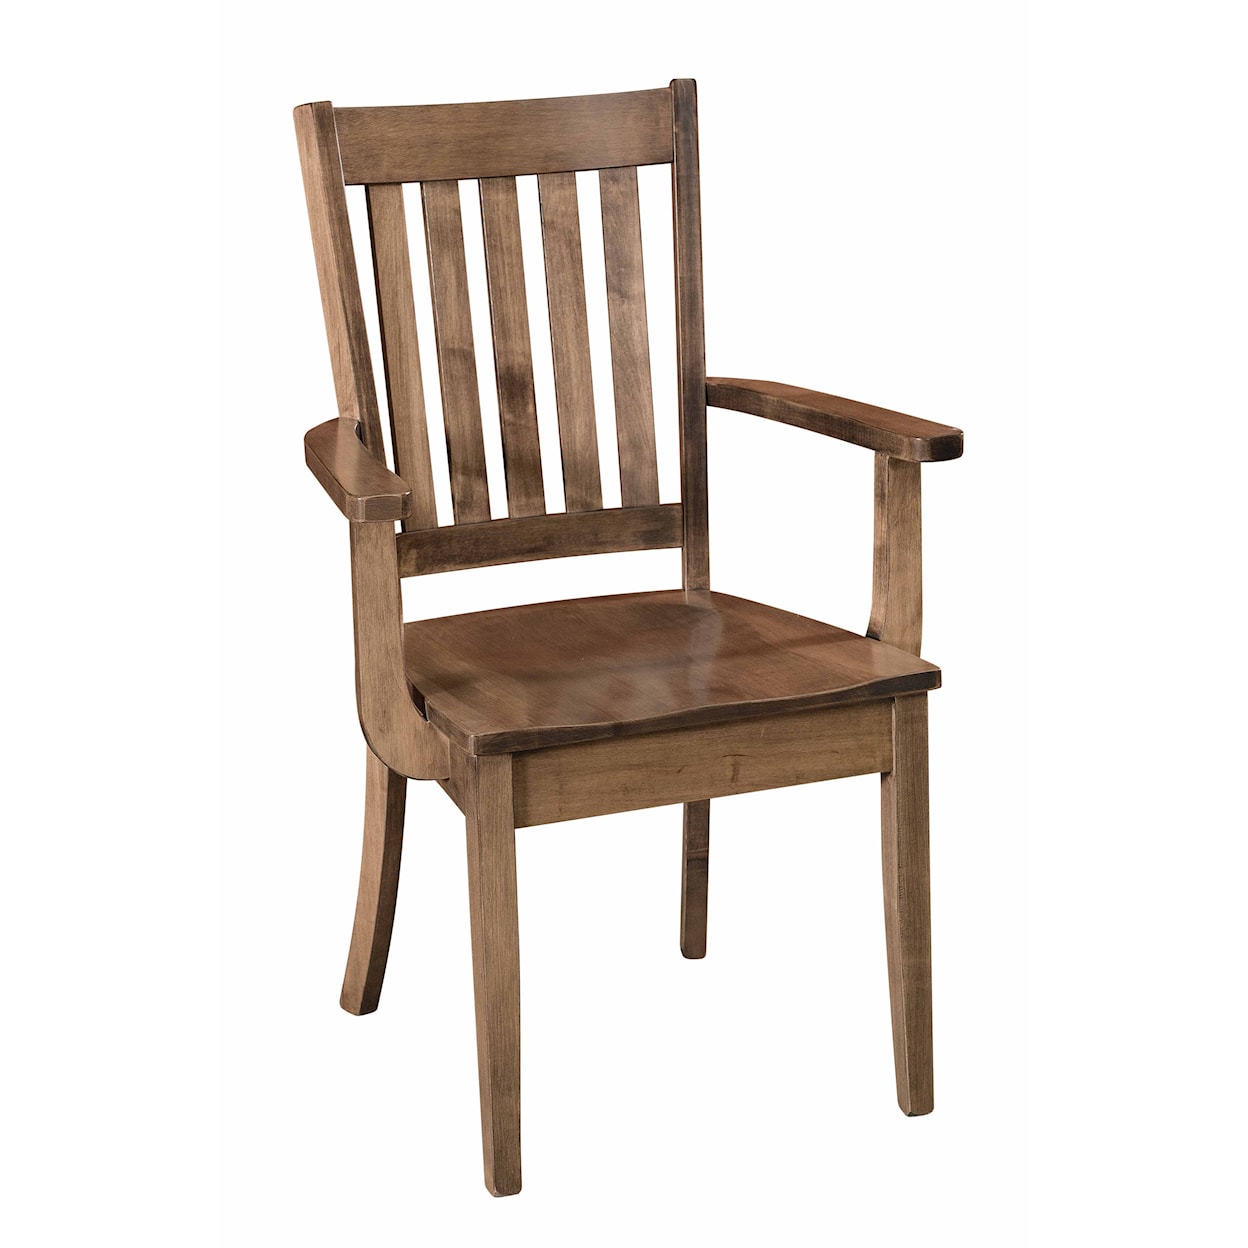 Archbold Furniture Amish Essentials Casual Dining Camden Dining Arm Chair